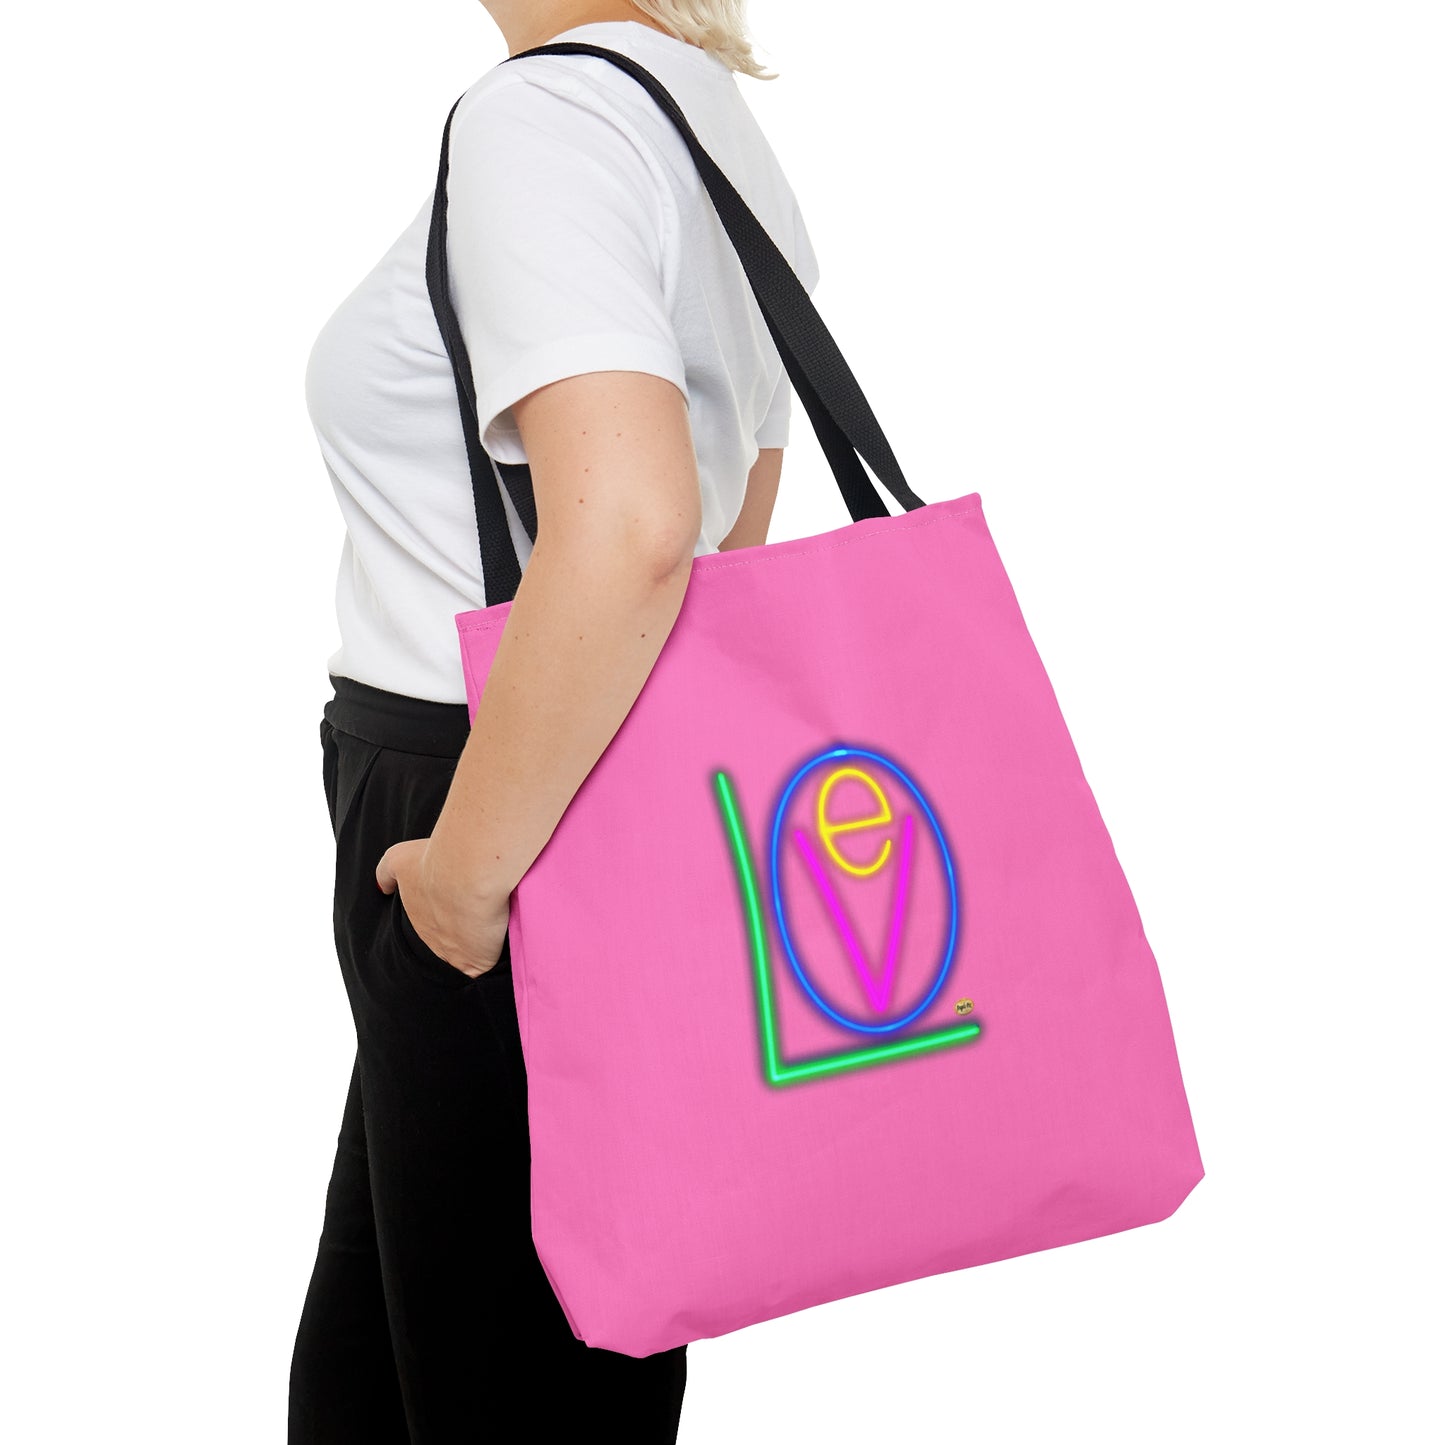 NEON Green Love Tote is perfect for all those errands!  It's so bright and colorful that you won't mind getting out  of the house for a while.